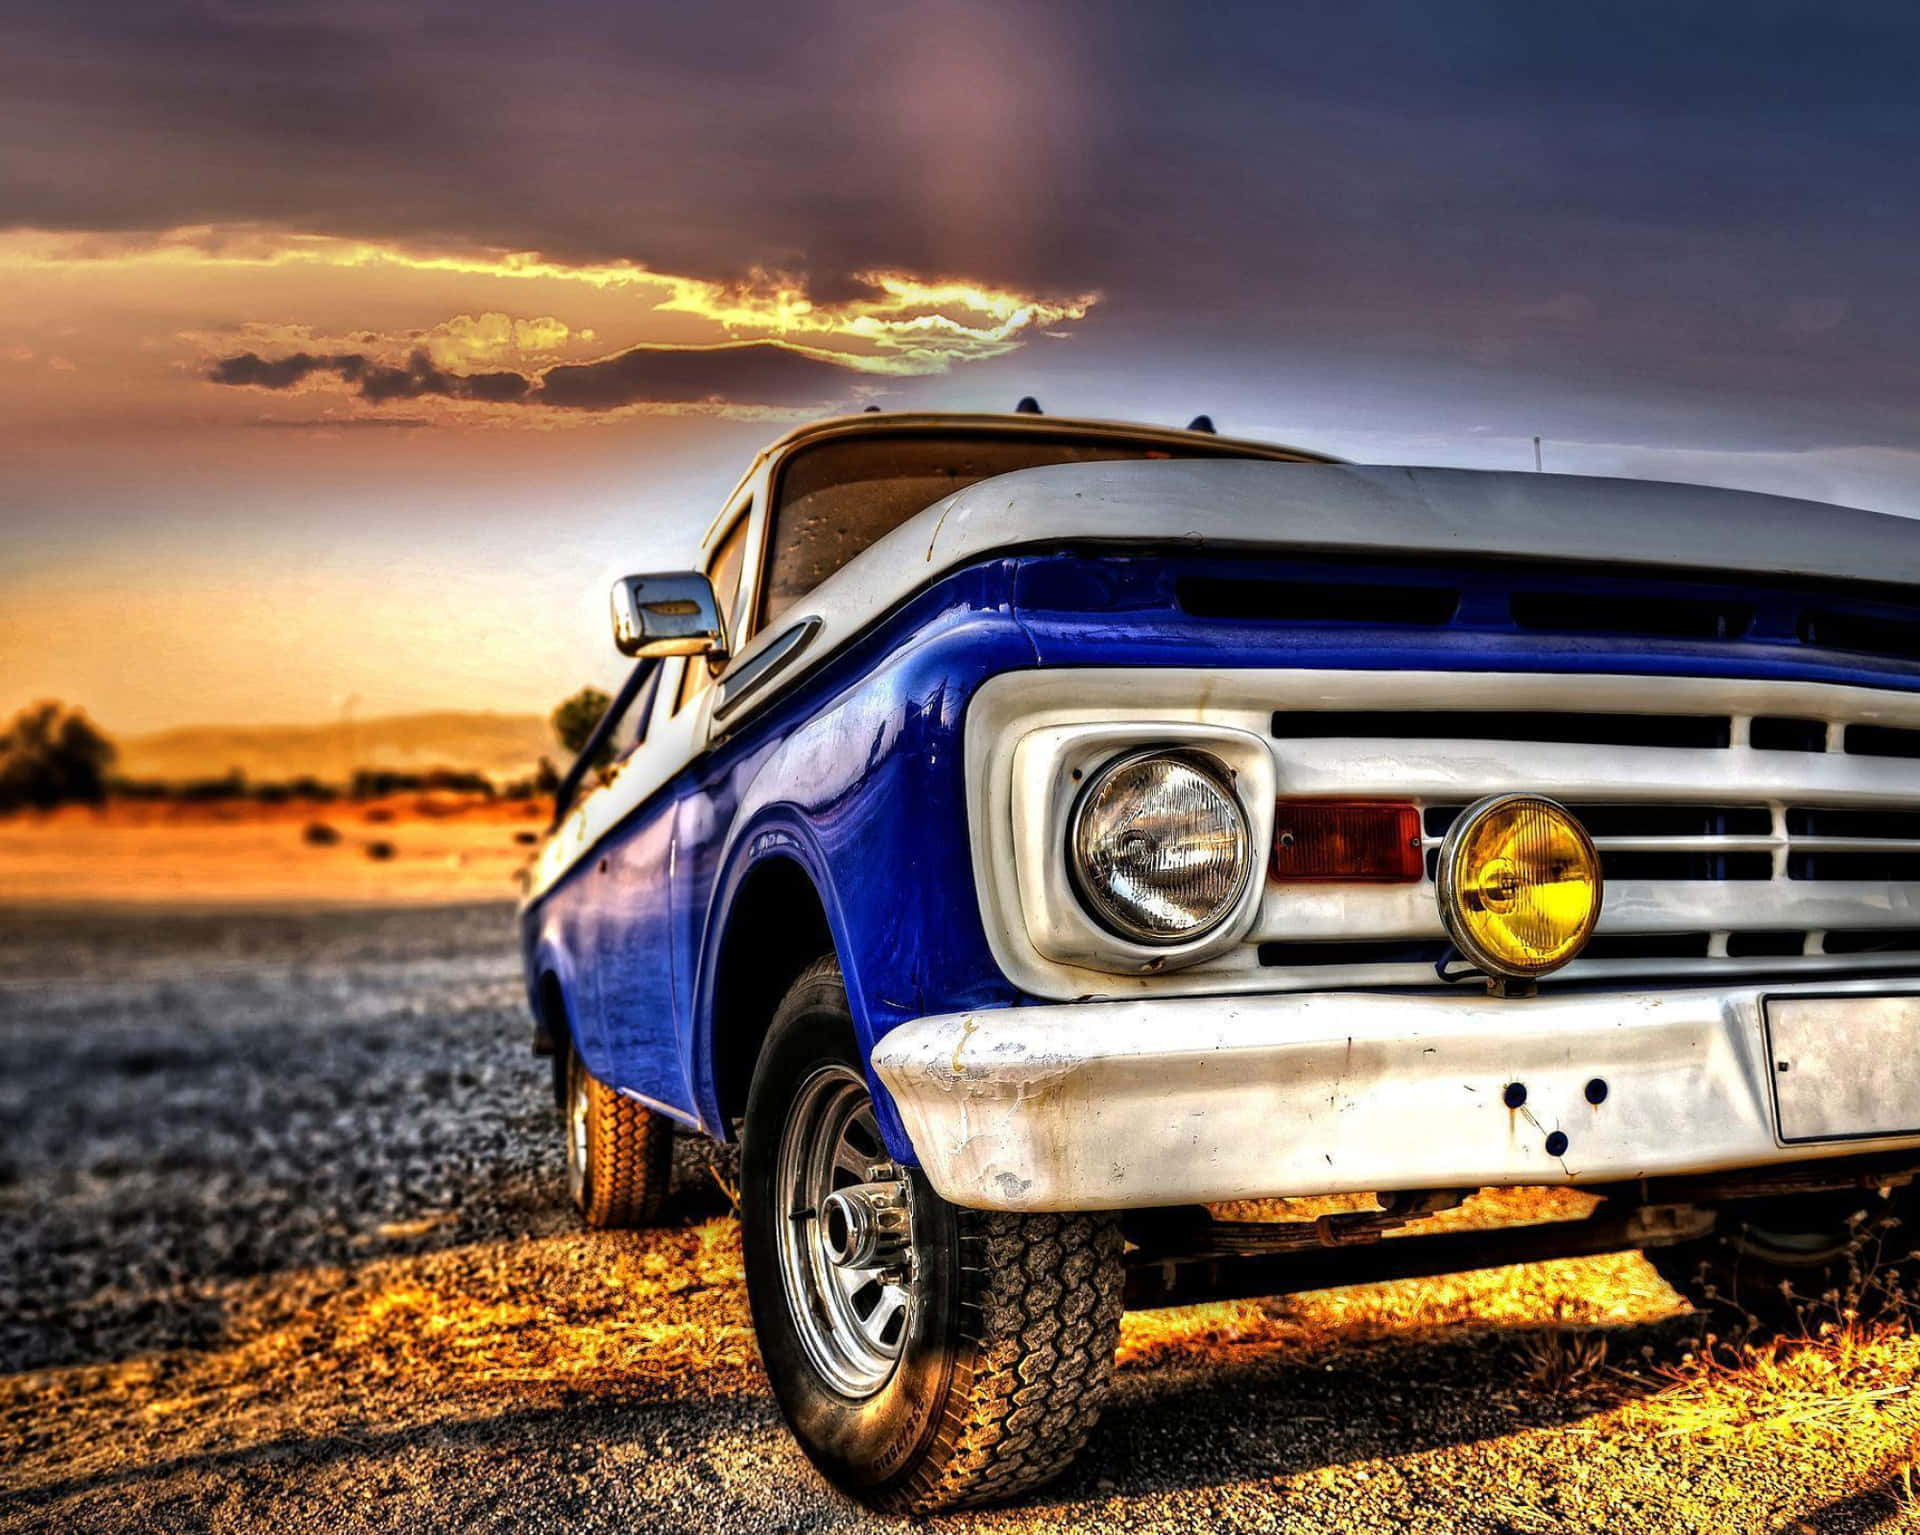 old ford truck wallpaper